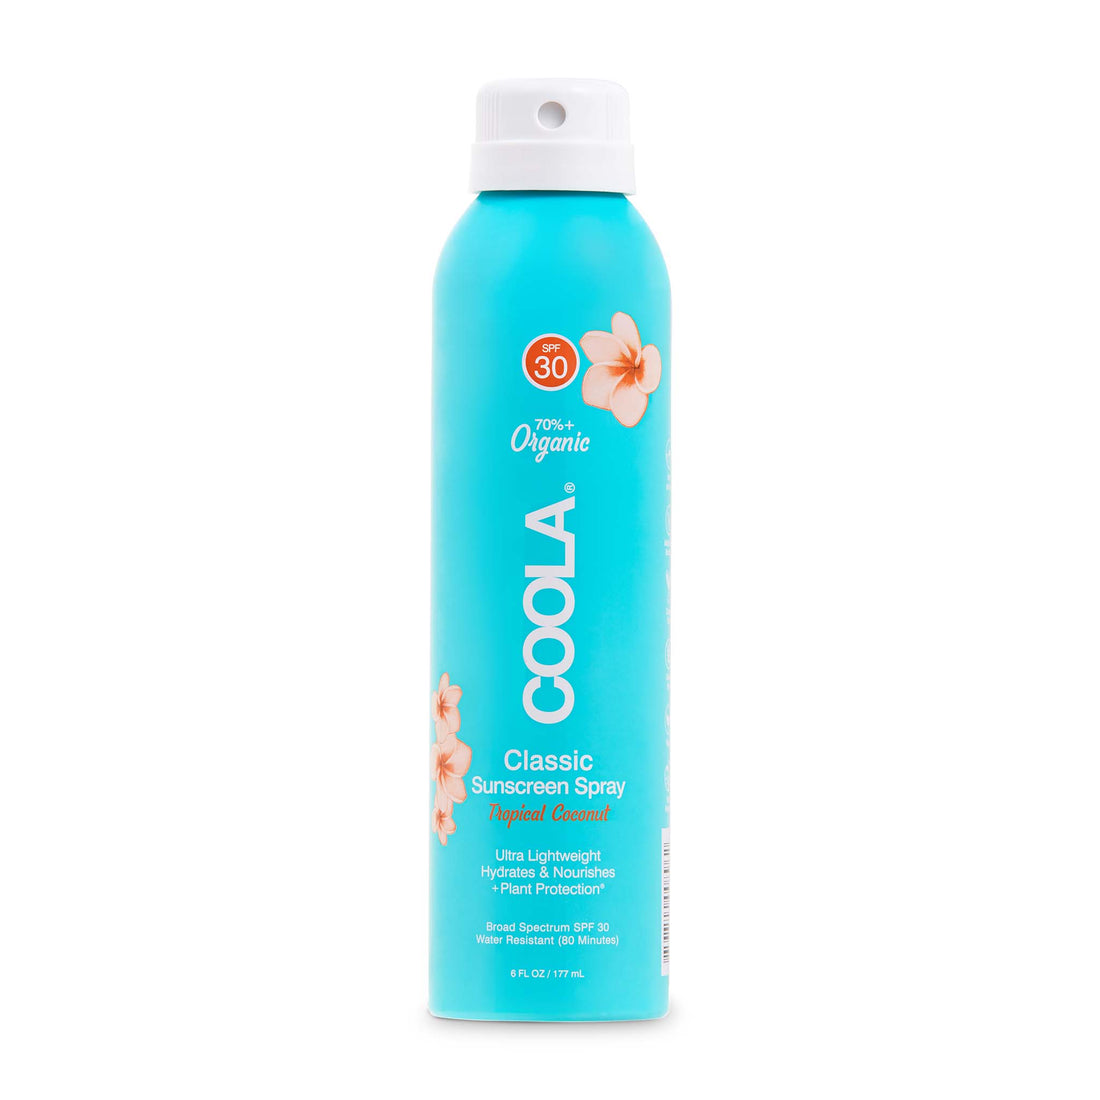 Coola Sunscreen Spray SPF 30 Tropical Coconut is a non aerosol spray, safe for planes and is reef friendly.